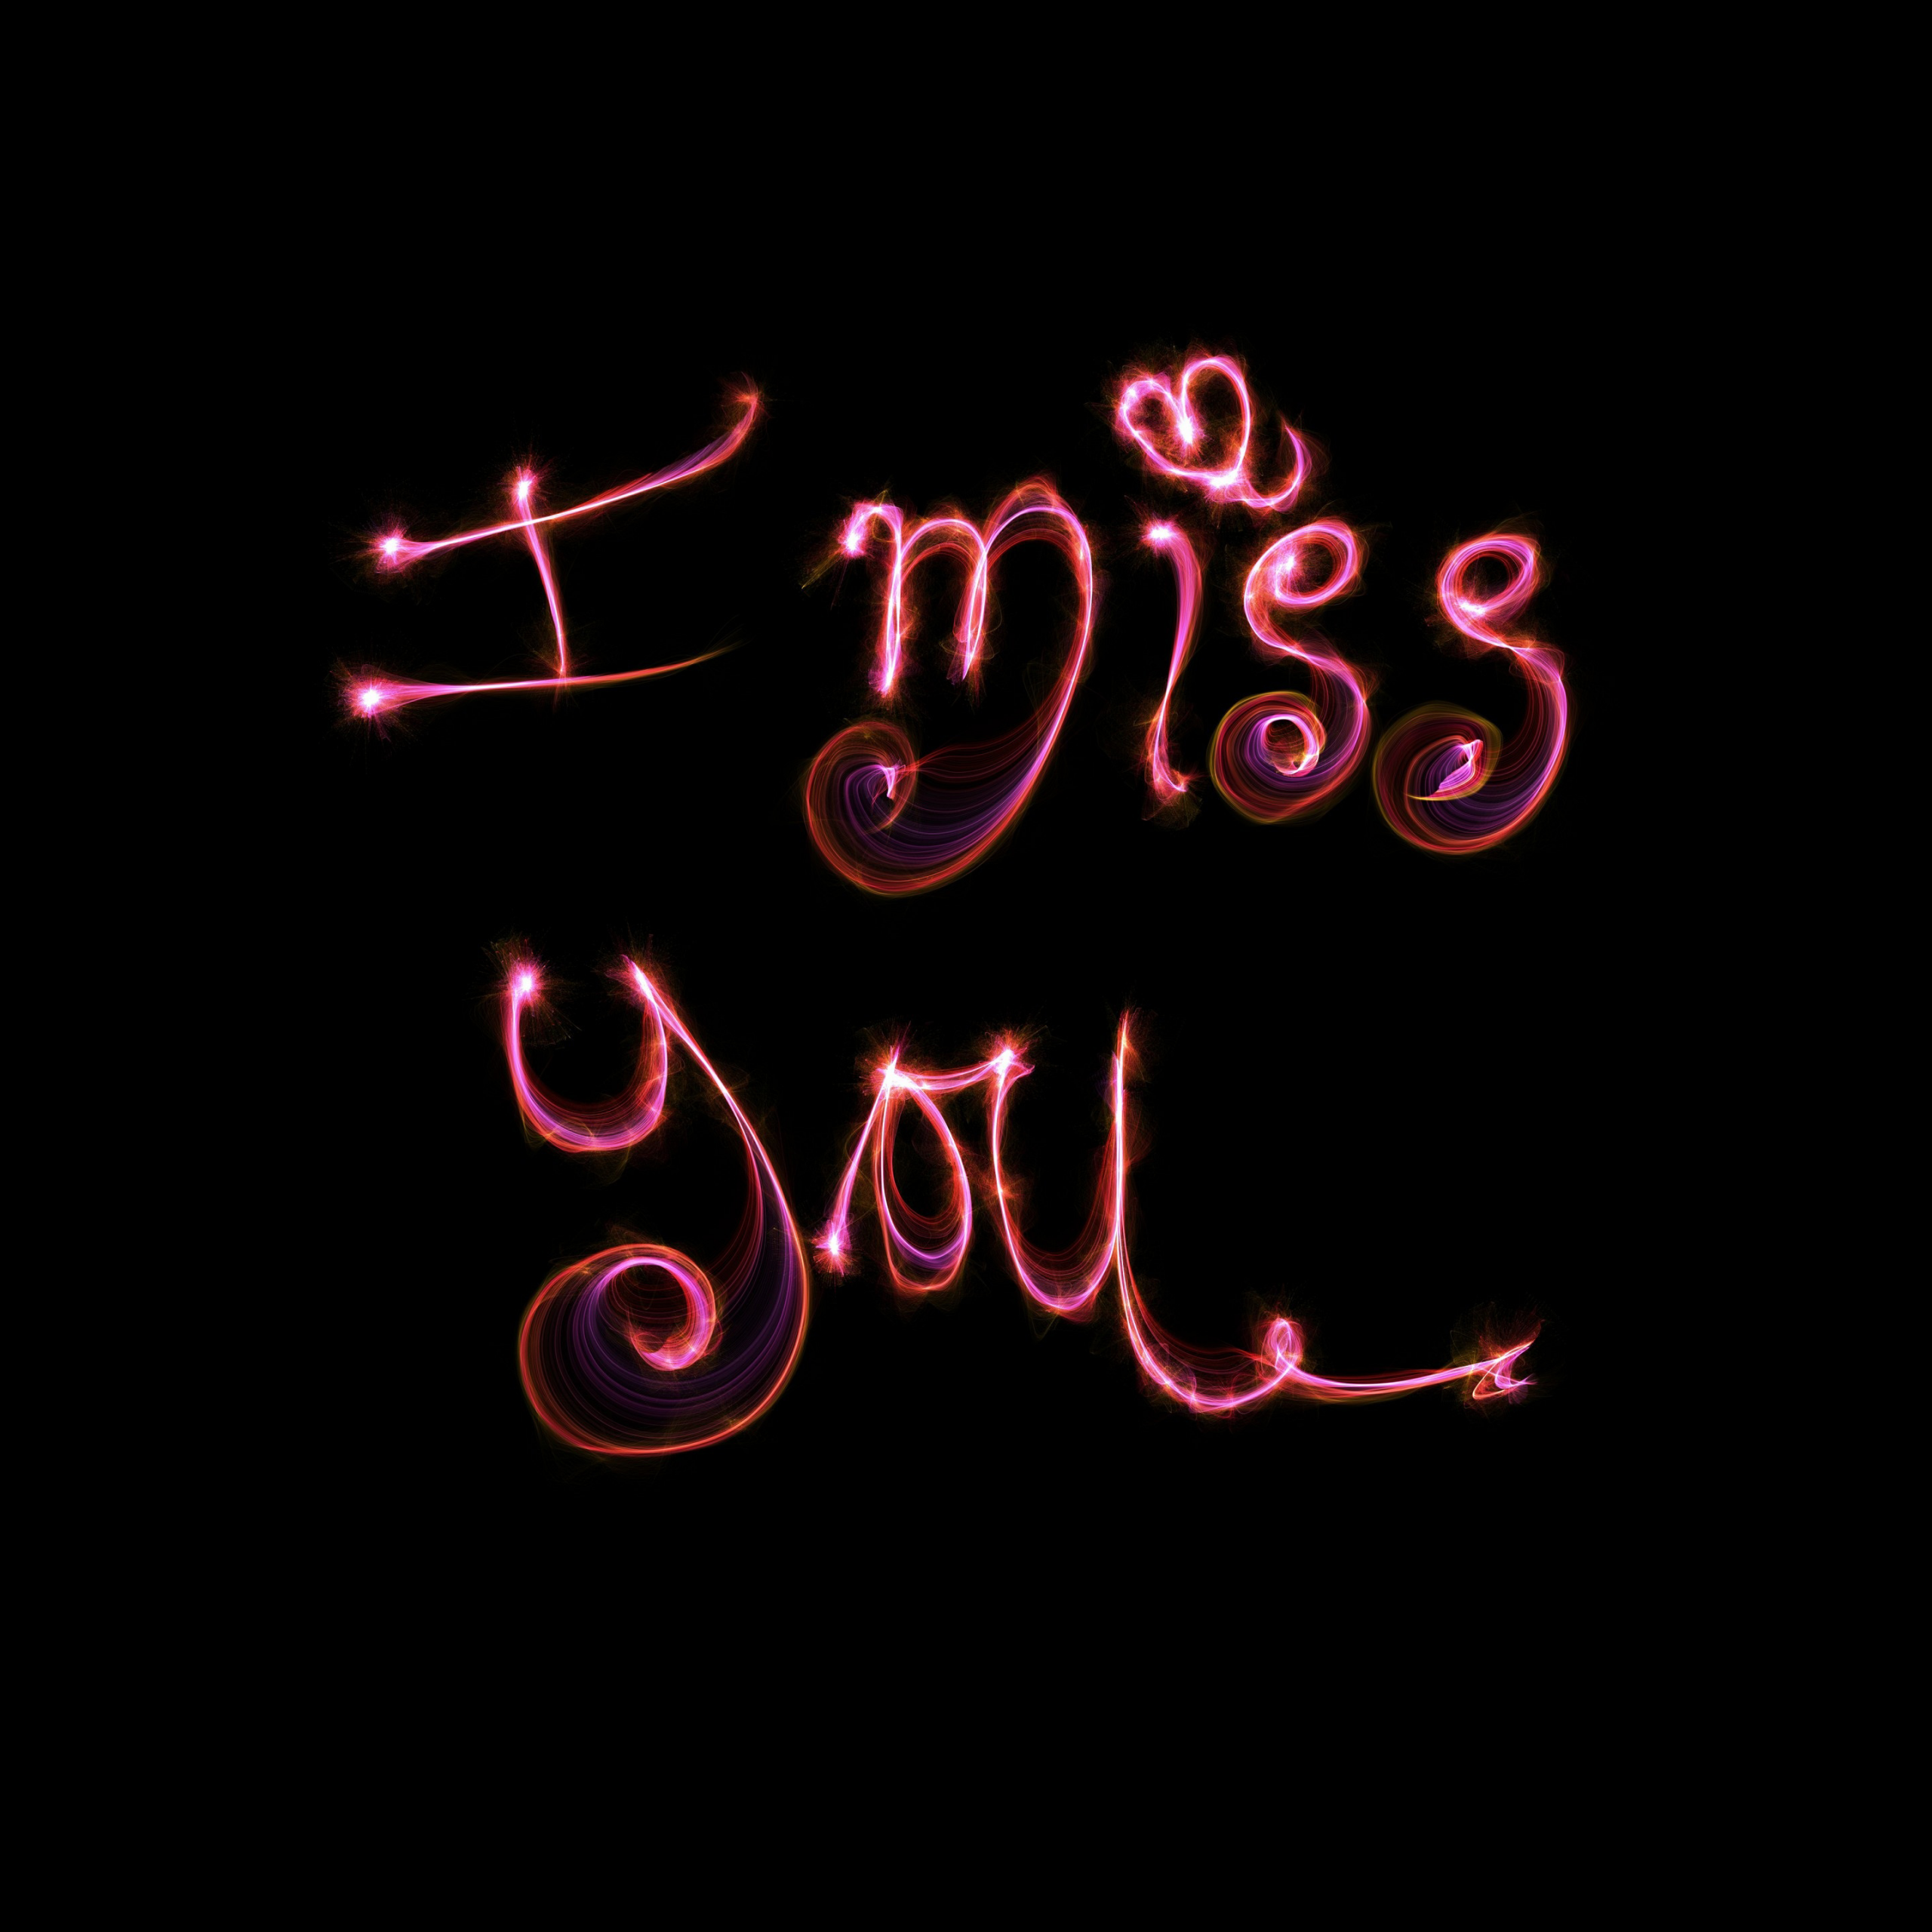 missing you poems wallpapers